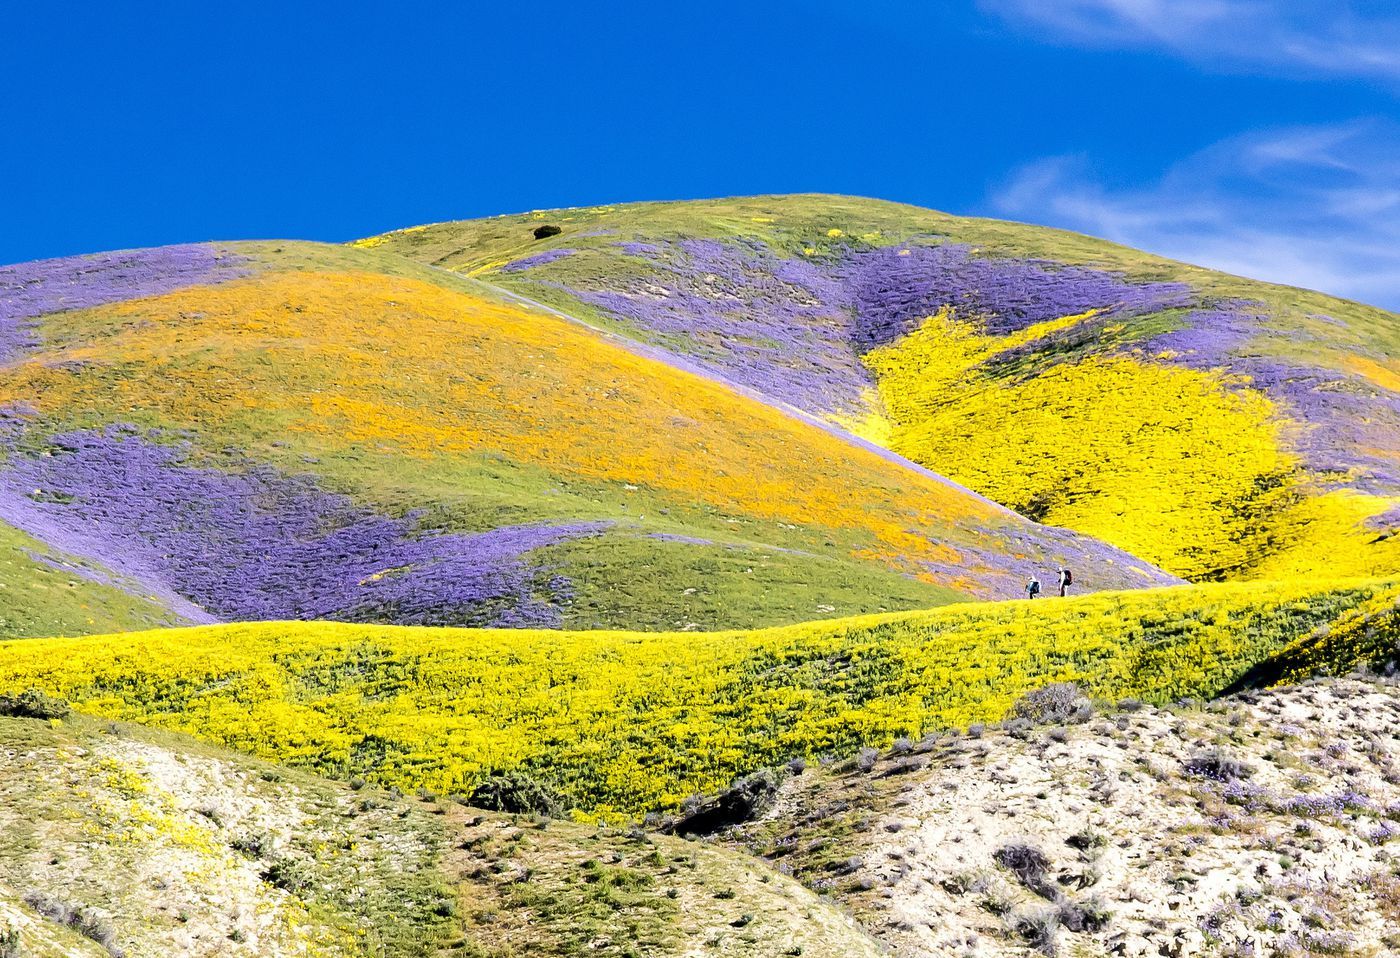 What you need to know about the 'super bloom' at Carrizo Plain National Monument